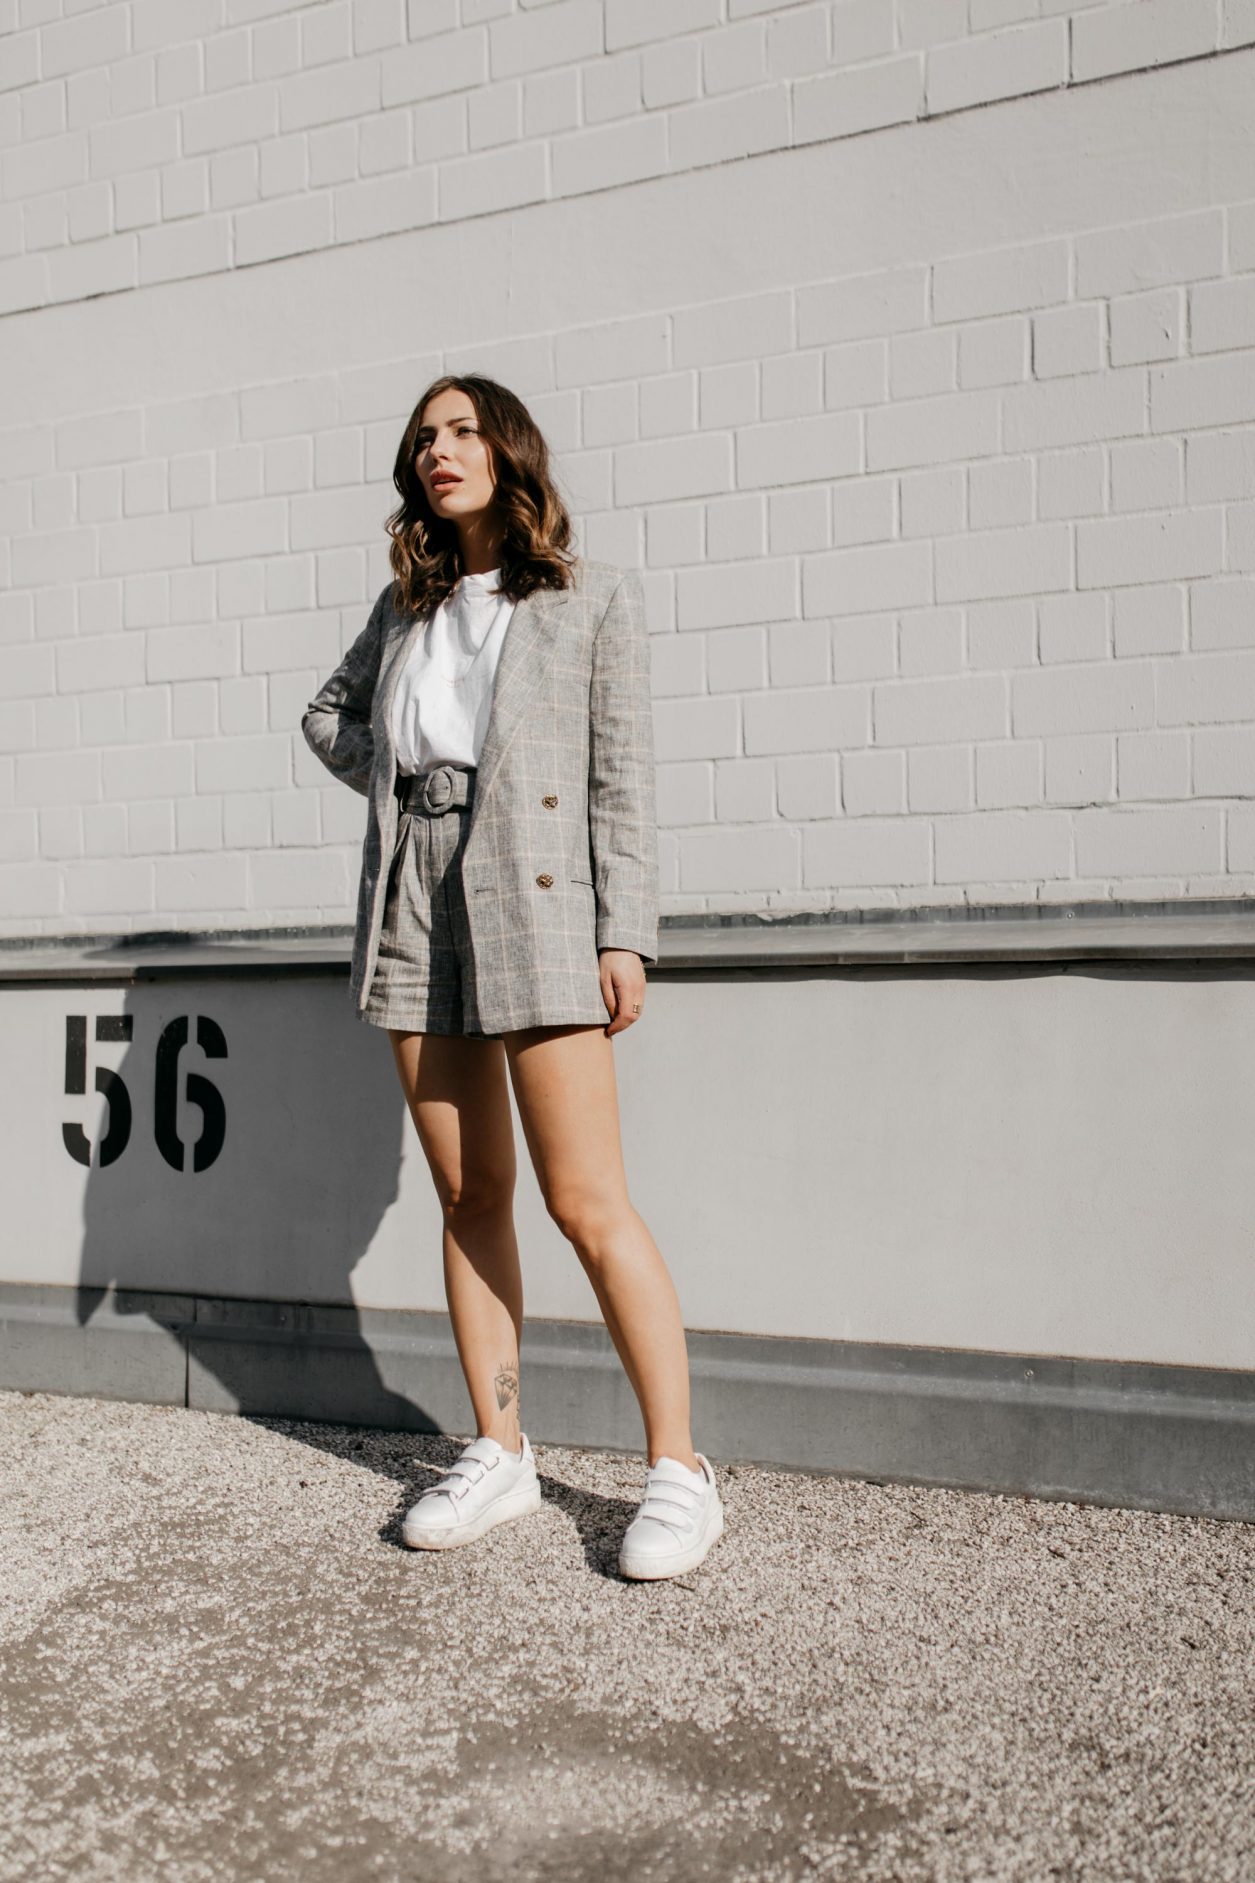 Streetstyle by Masha Sedgwick | Spring editorial, summer business suit with pants, outfit inspiration | Wearing linen beige checked shorts suit by Sandro Paris, white basic tee by Acne Studios, white sneaker 